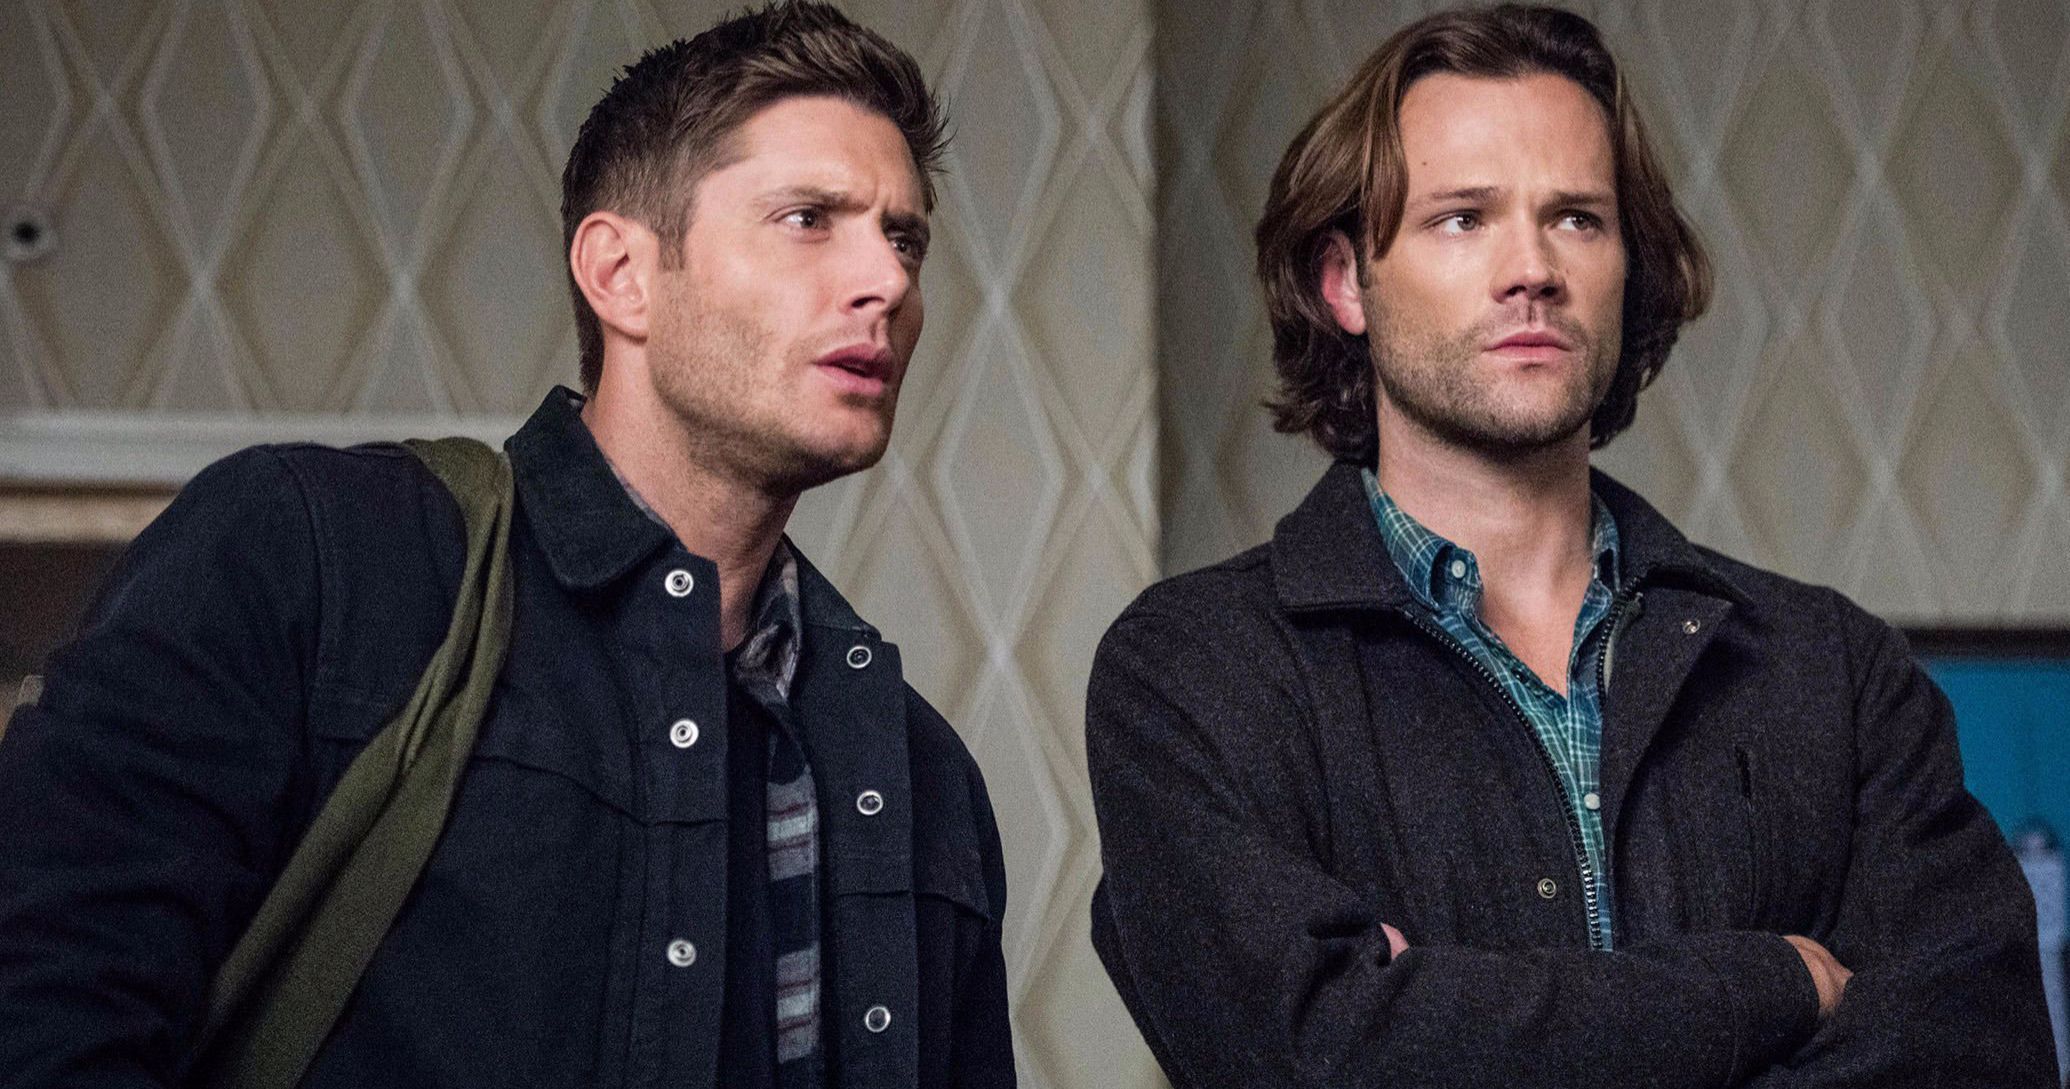 Supernatural Series Finale Is a Personal, Old-School Style Episode Teases Showrunners